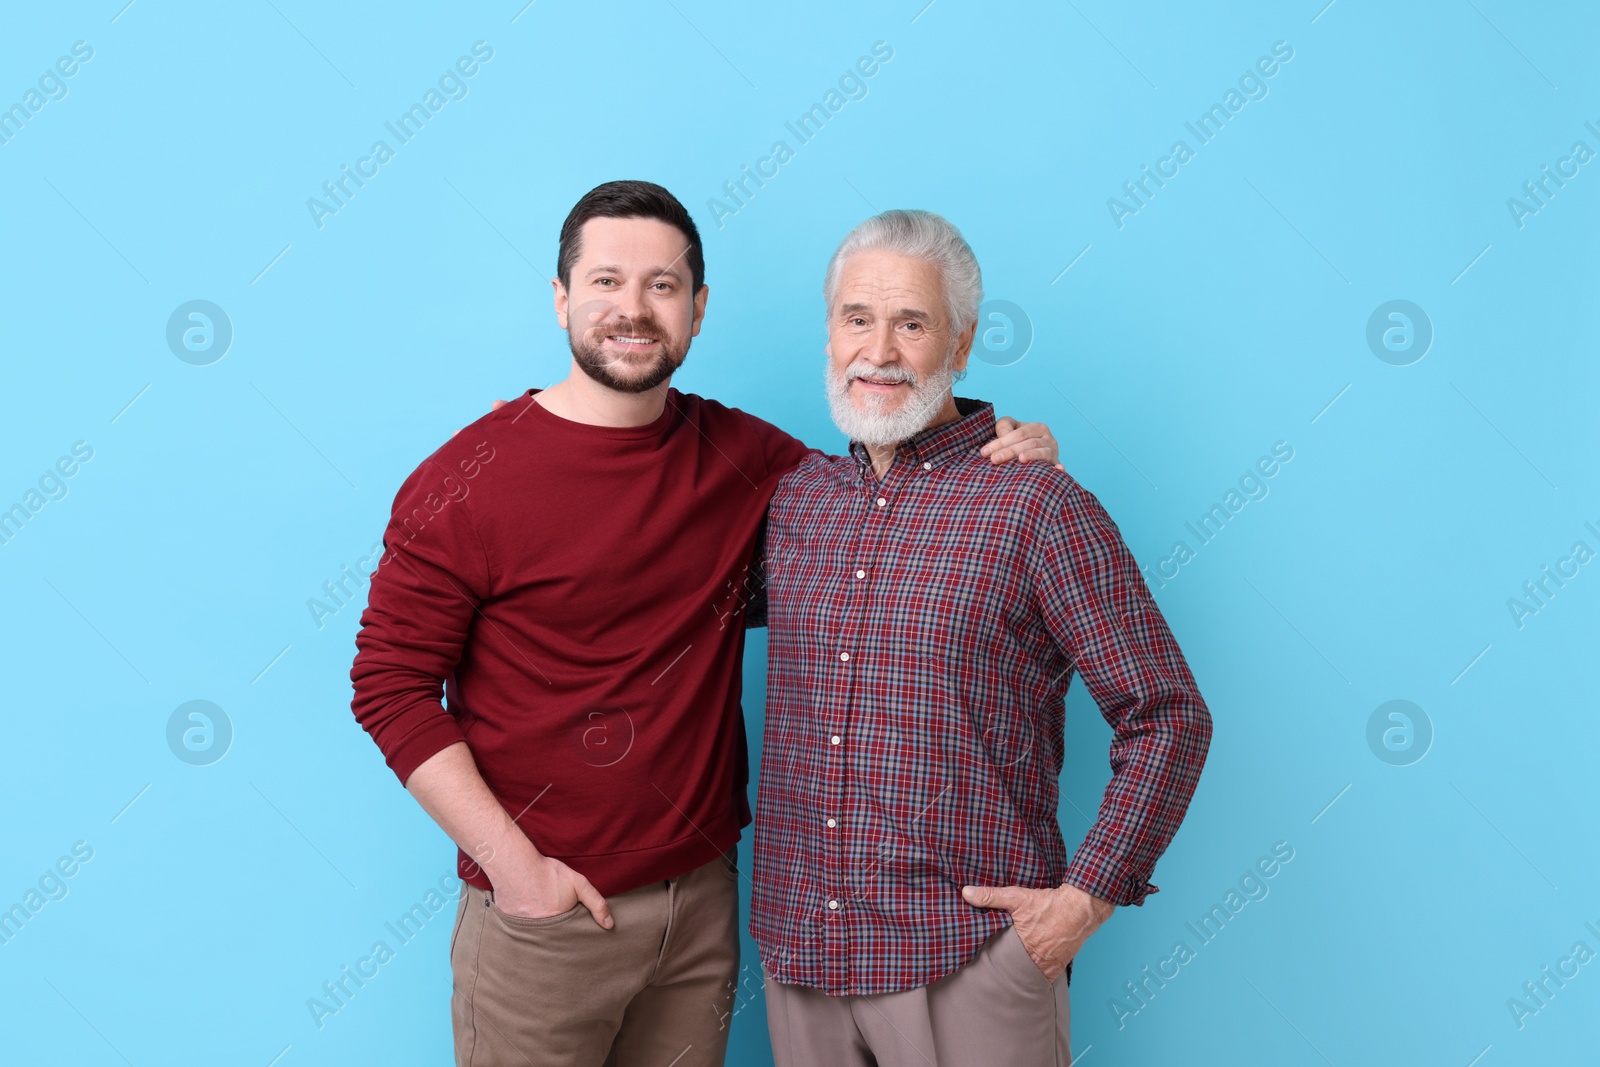 Photo of Happy son and his dad on light blue background